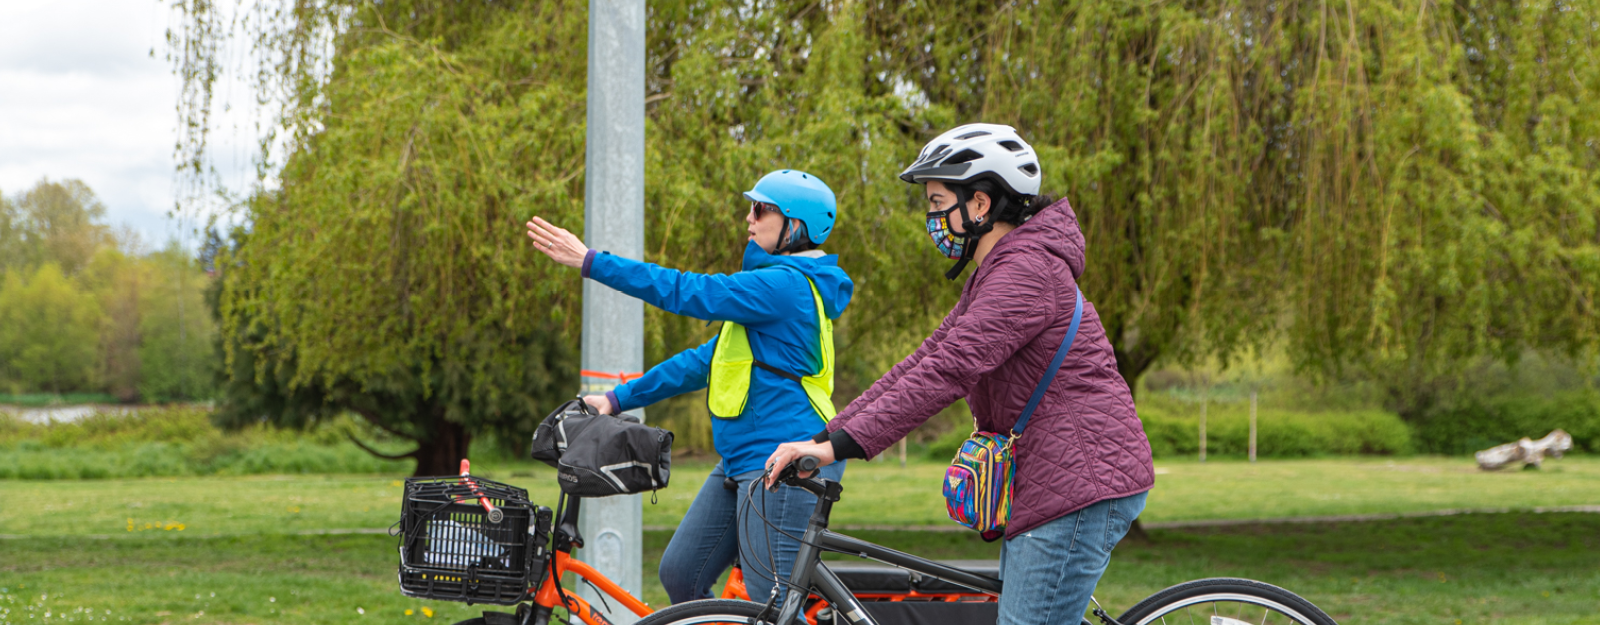 A bike education instructor points at something in the distance. An an adult woman student looks at what the instructor is pointing at. The instructor and student are both on bikes.